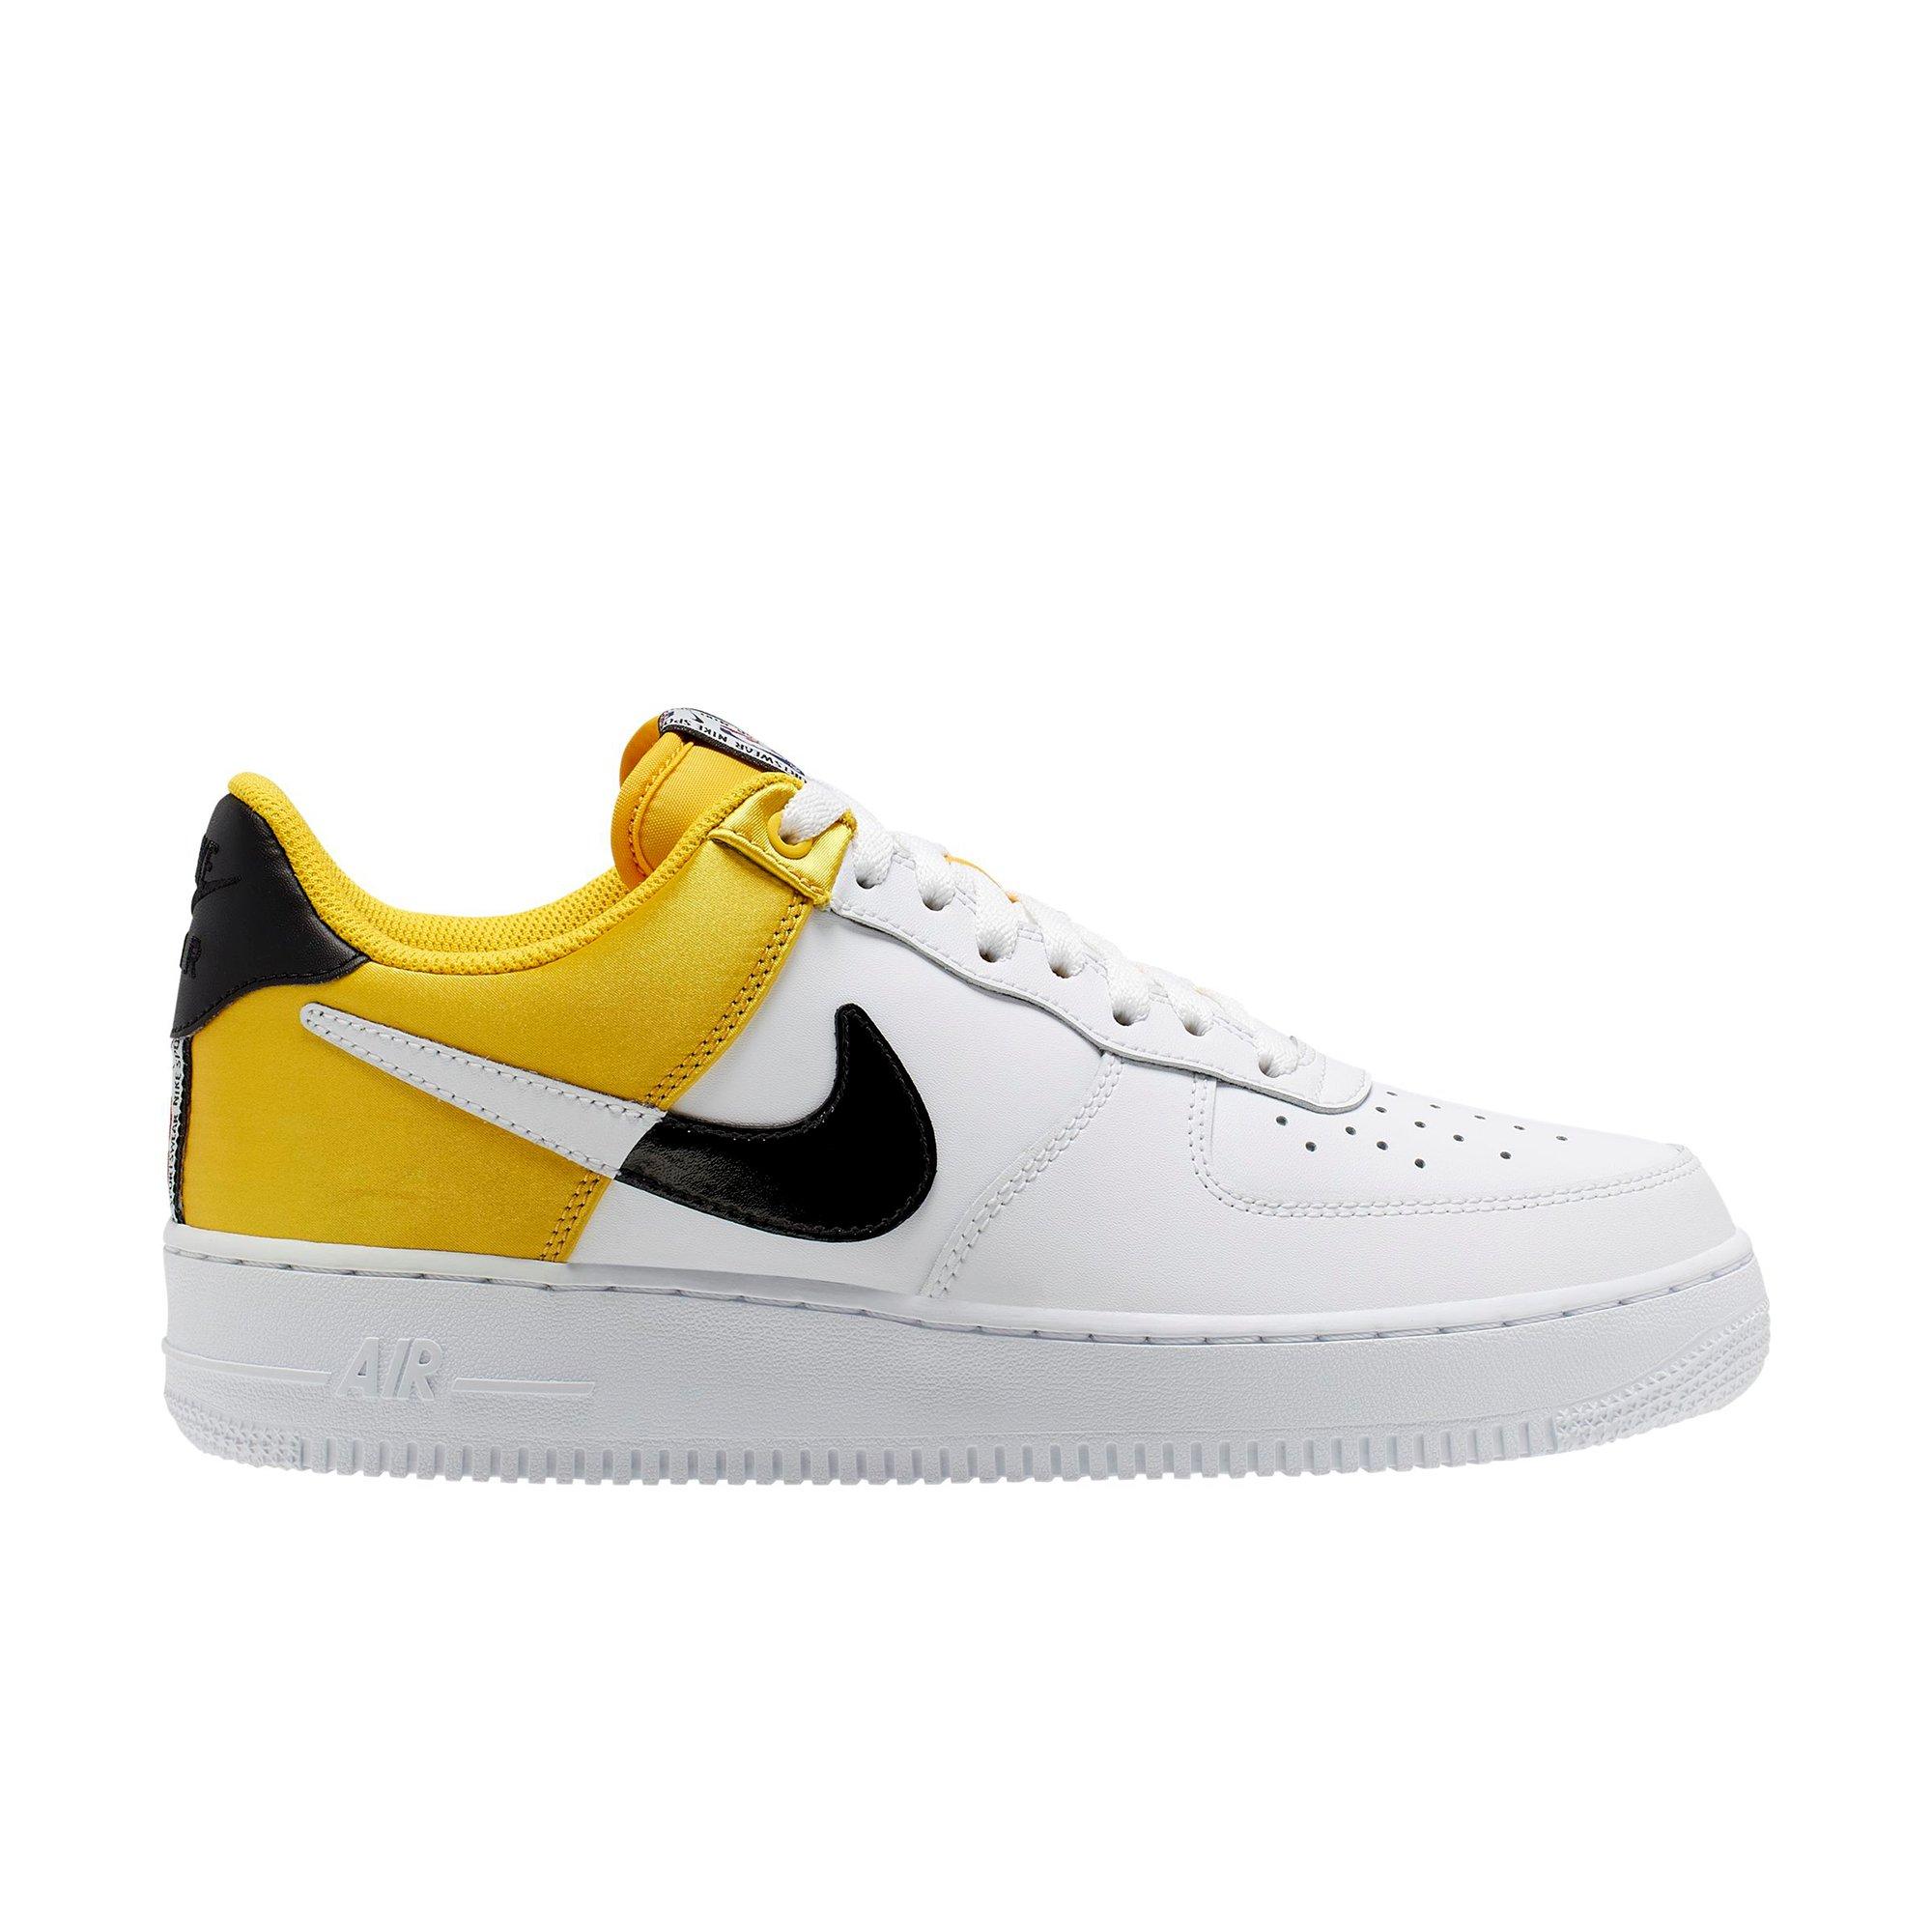 nike air force lv8 yellow